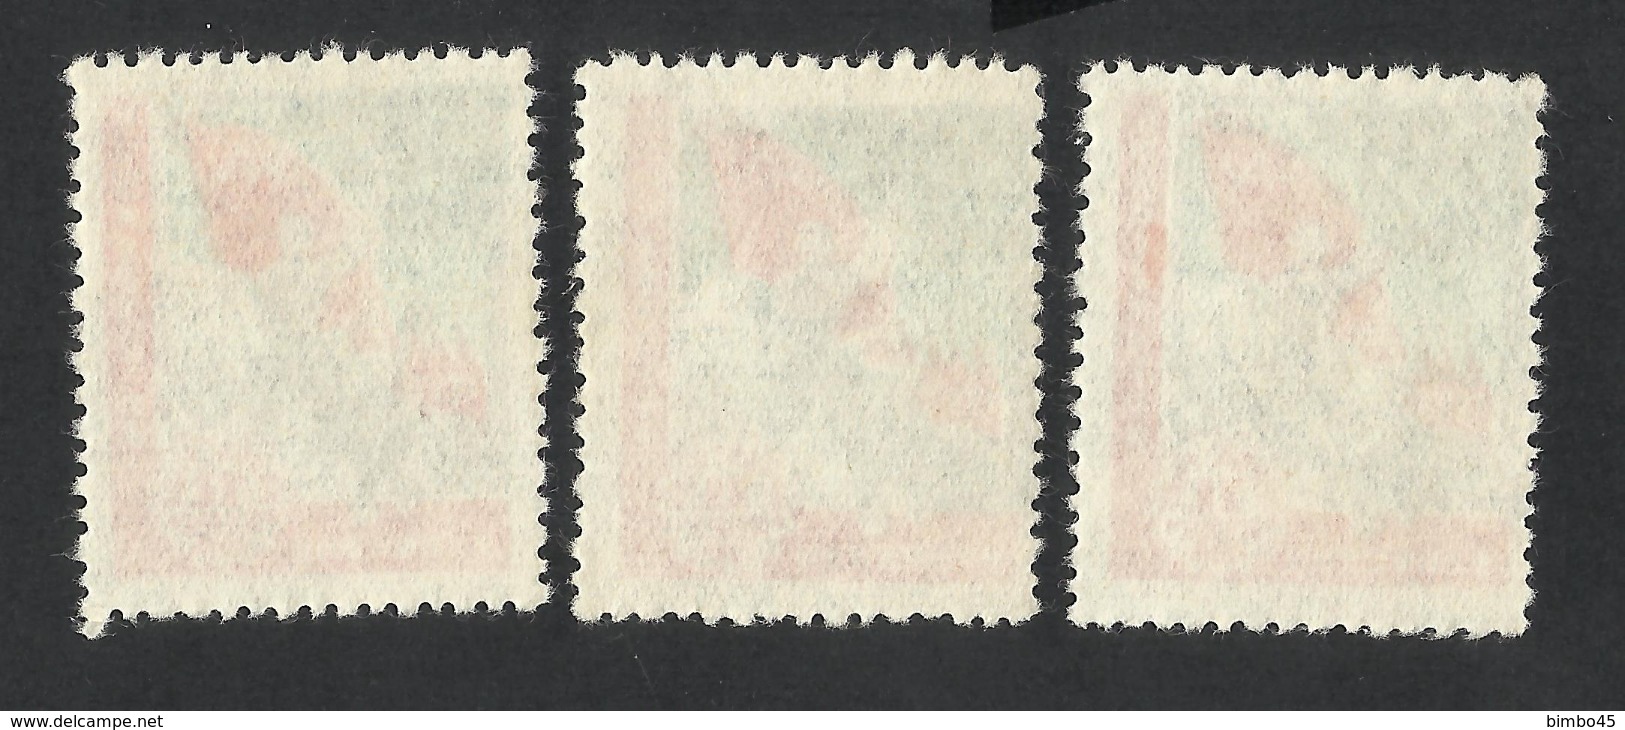 ERRORS-China Northeast-1949 Workers With Flags 1500$-3 Different Printing Models,with Displaced Printing--Mint No Gum - Nordostchina 1946-48